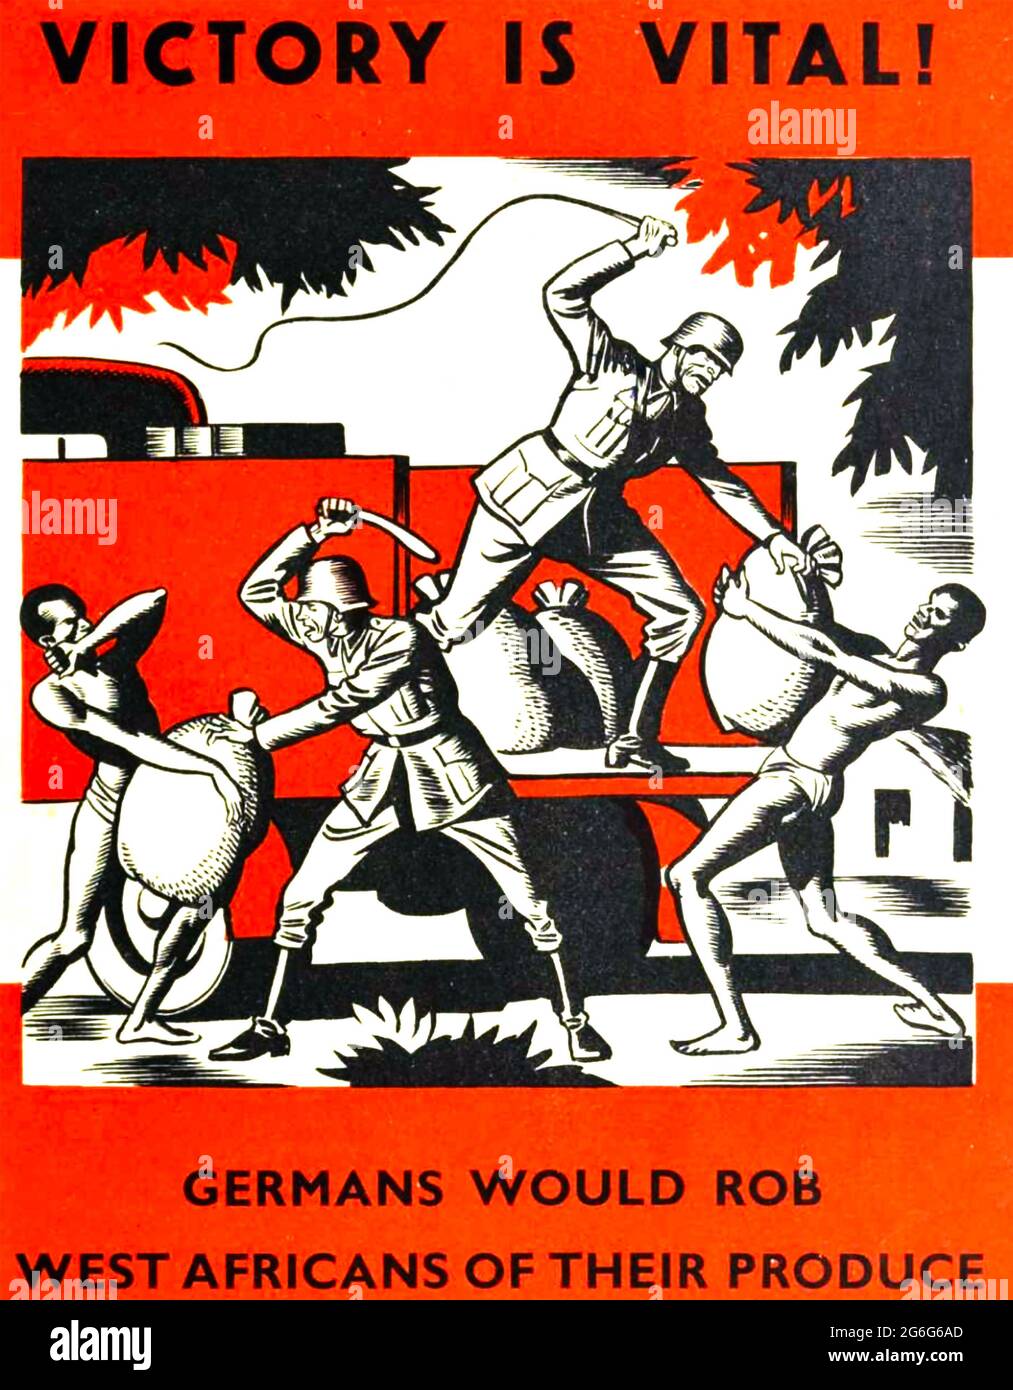 VICTORY IS VITAL  British propaganda poster fromt 1941 showing Germans looting food in West African territories which were then part of the British Empire. Stock Photo